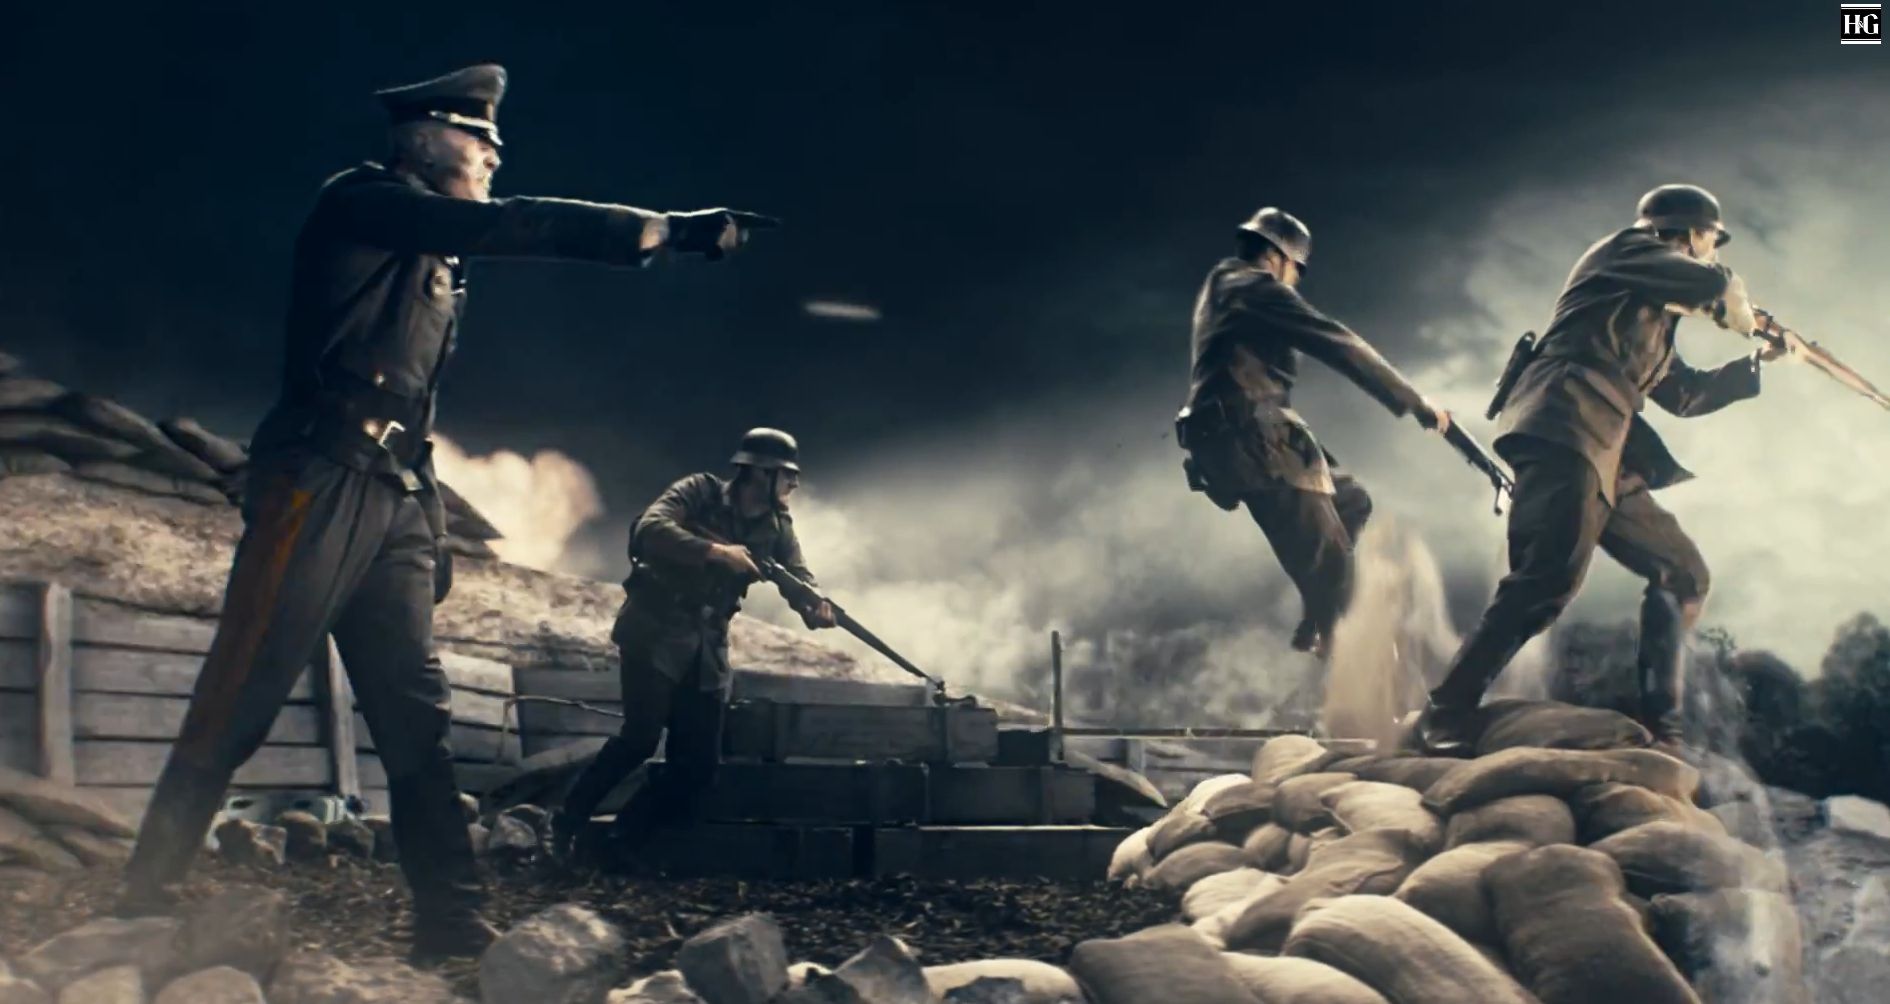 Heroes & Generals Wallpaper. Heroes & Generals Wallpaper, Heroes & Generals Background and Revolutionary General's Background